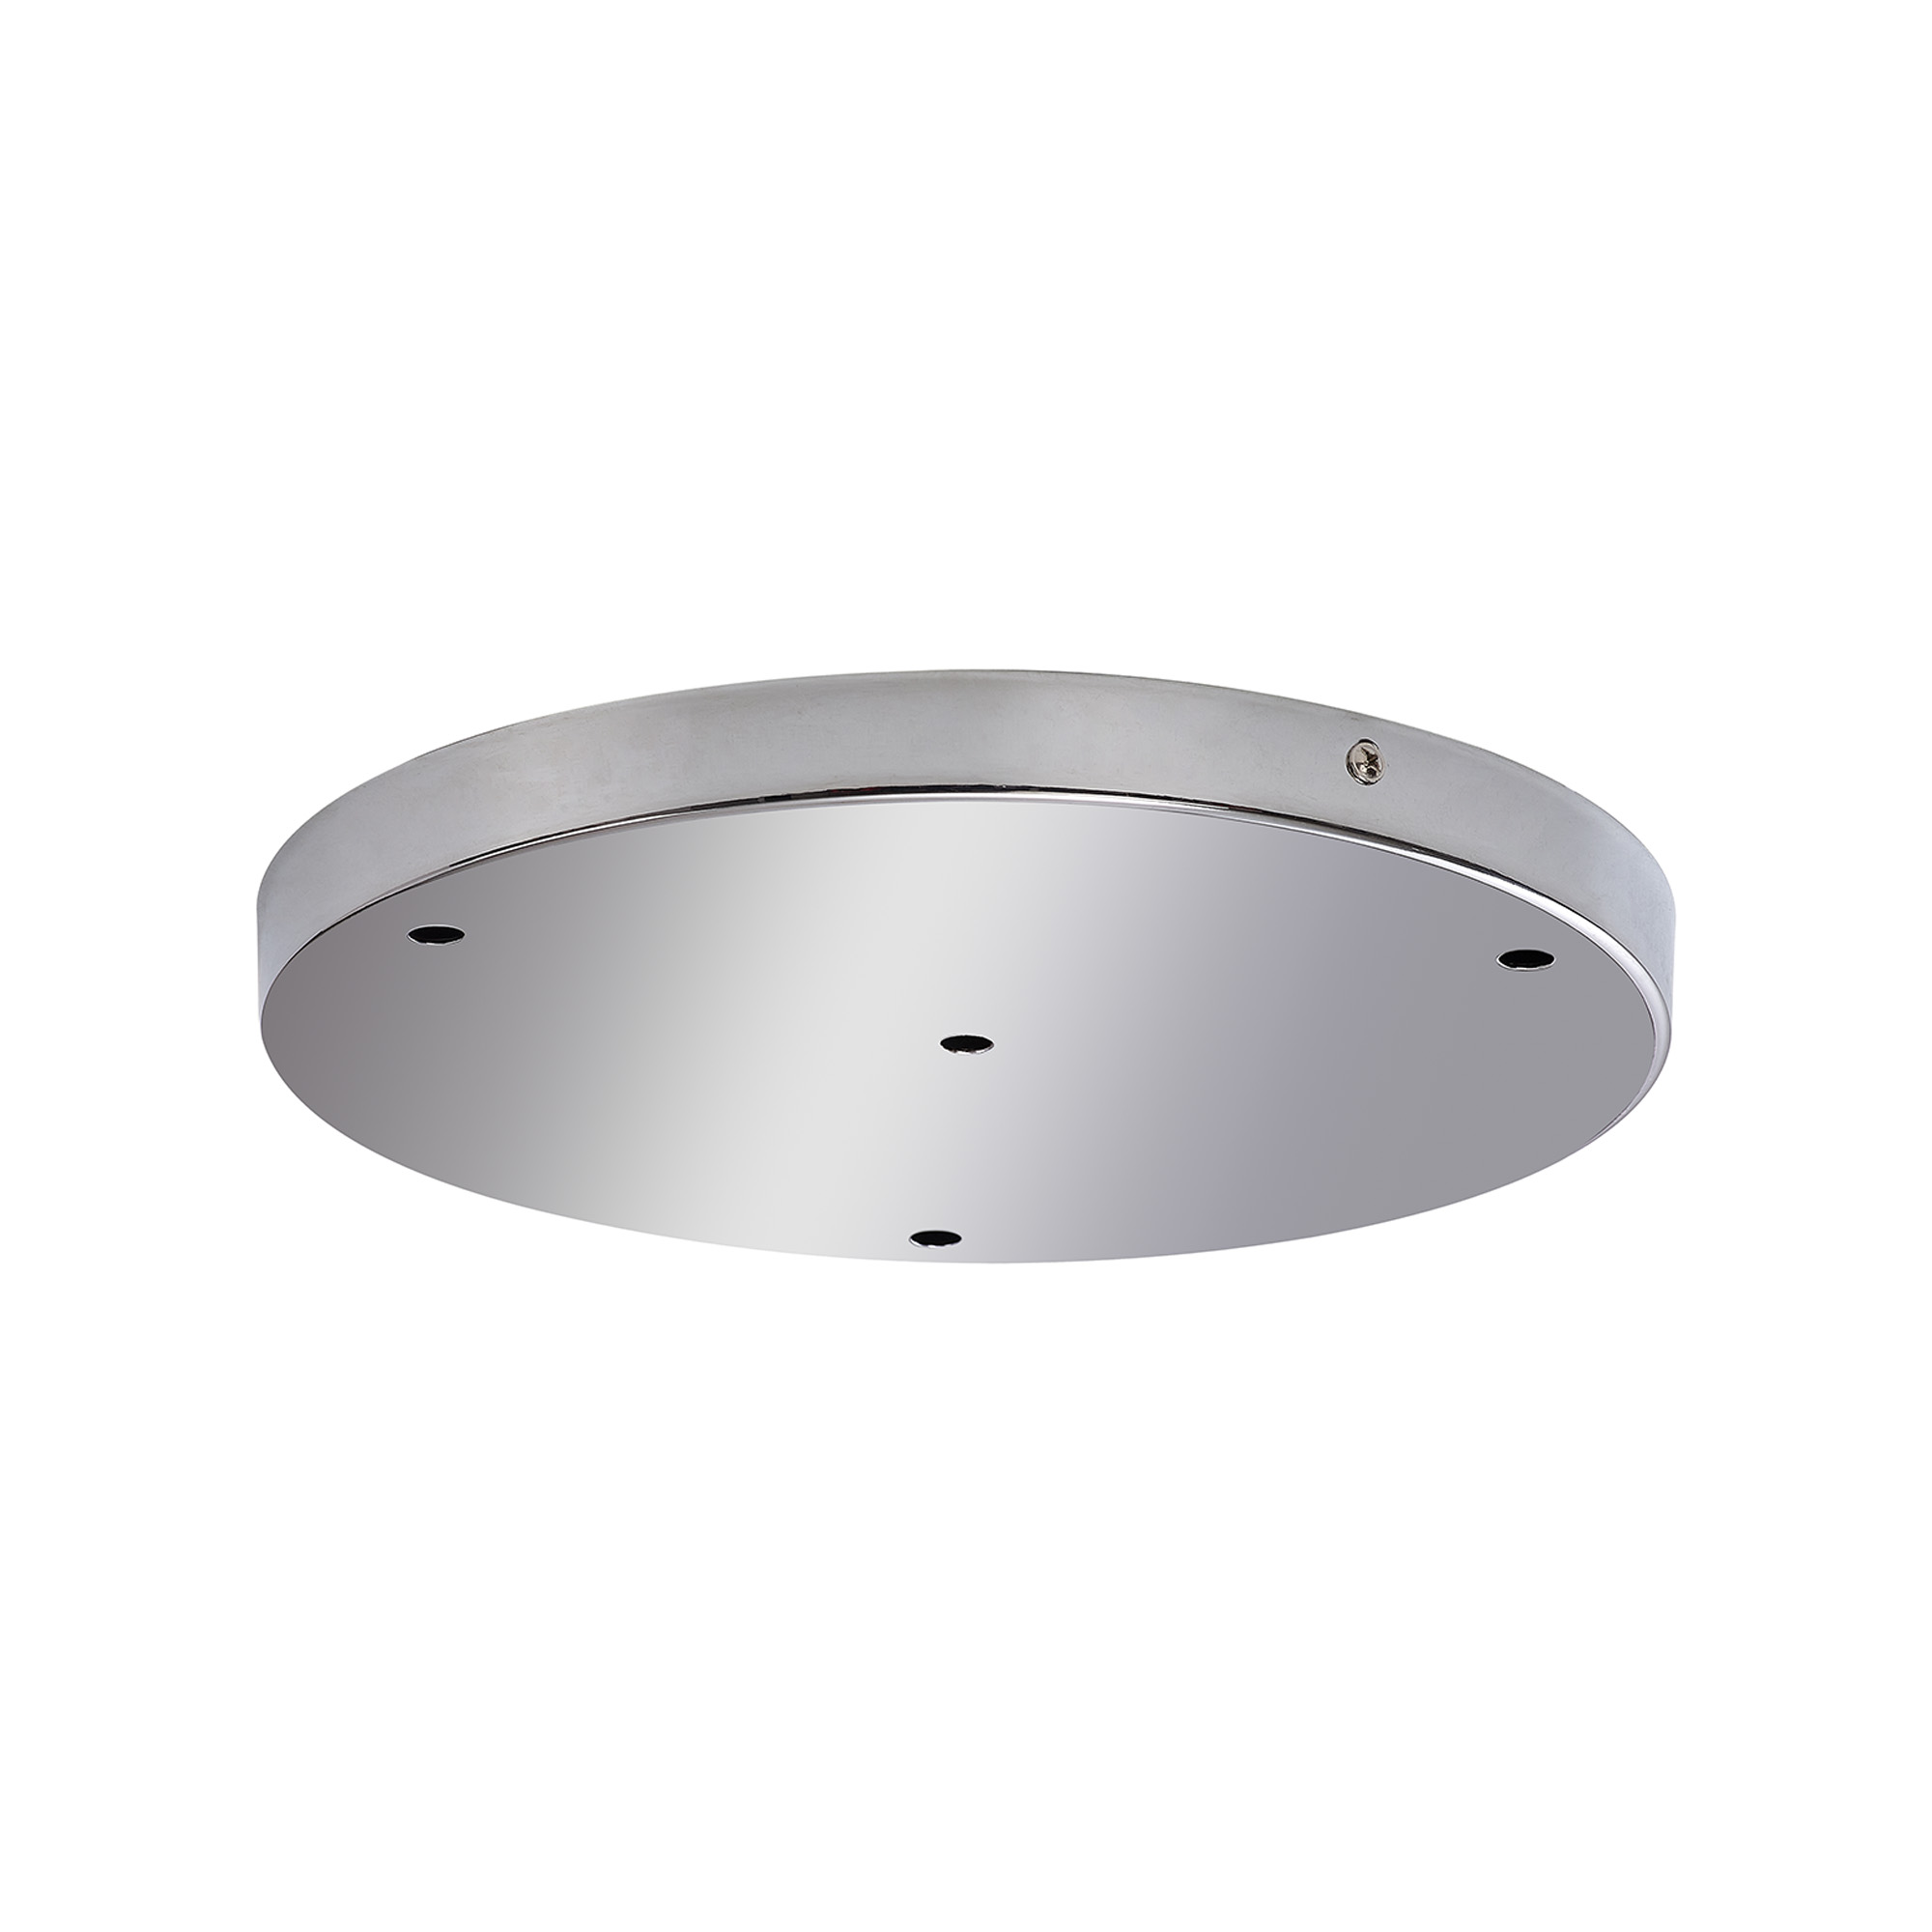 D0829CH  Hayes 4 Hole 28cm Round Ceiling Plate Polished Chrome